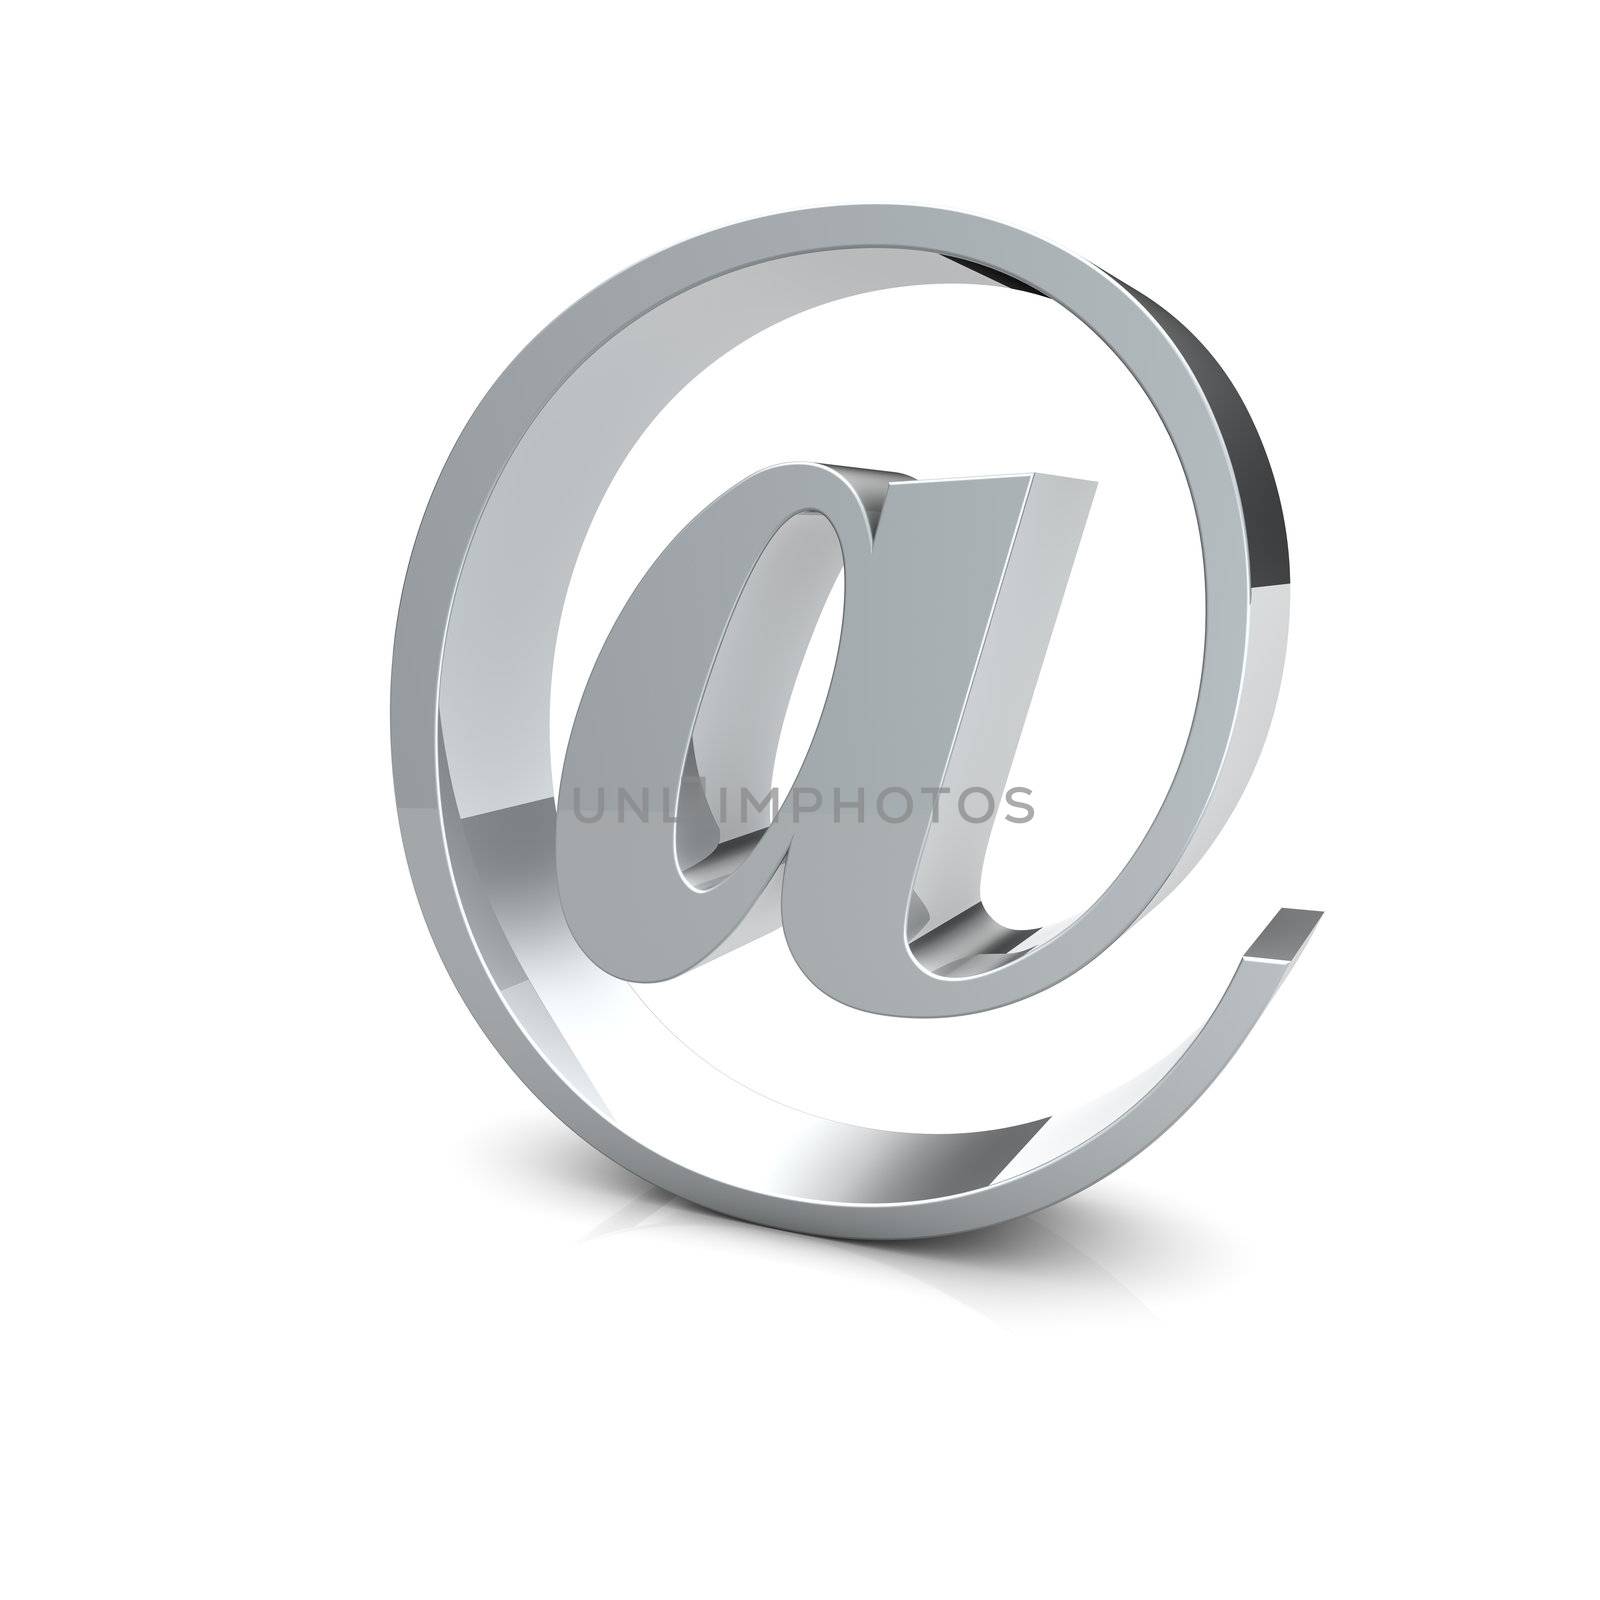 Rendering of an silver e-mail symbol